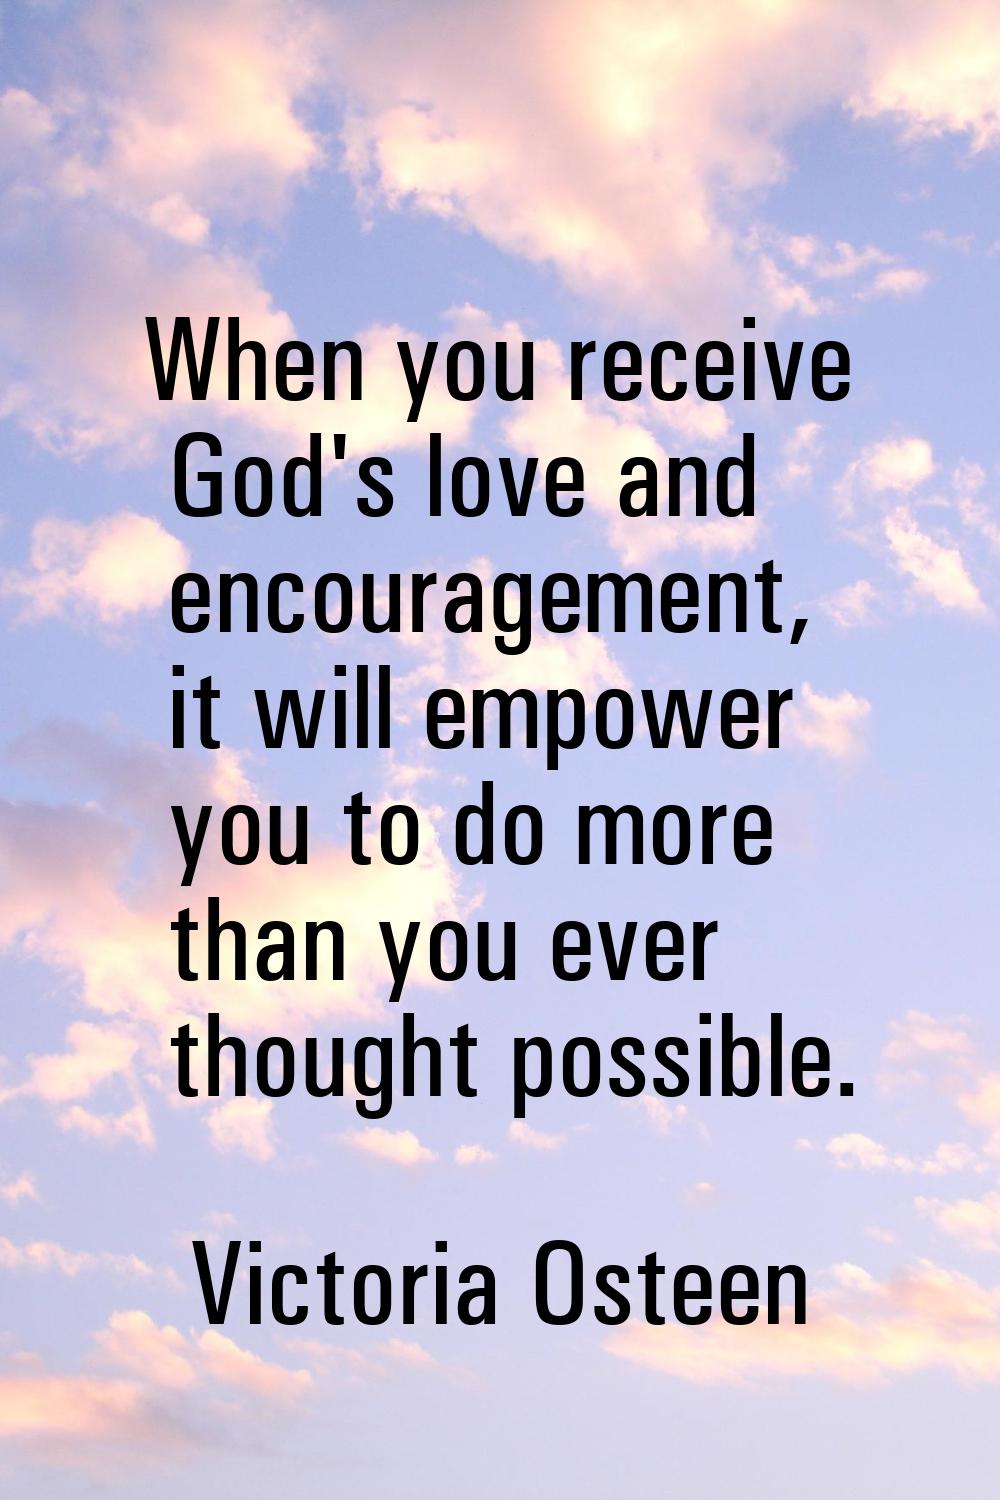 When you receive God's love and encouragement, it will empower you to do more than you ever thought